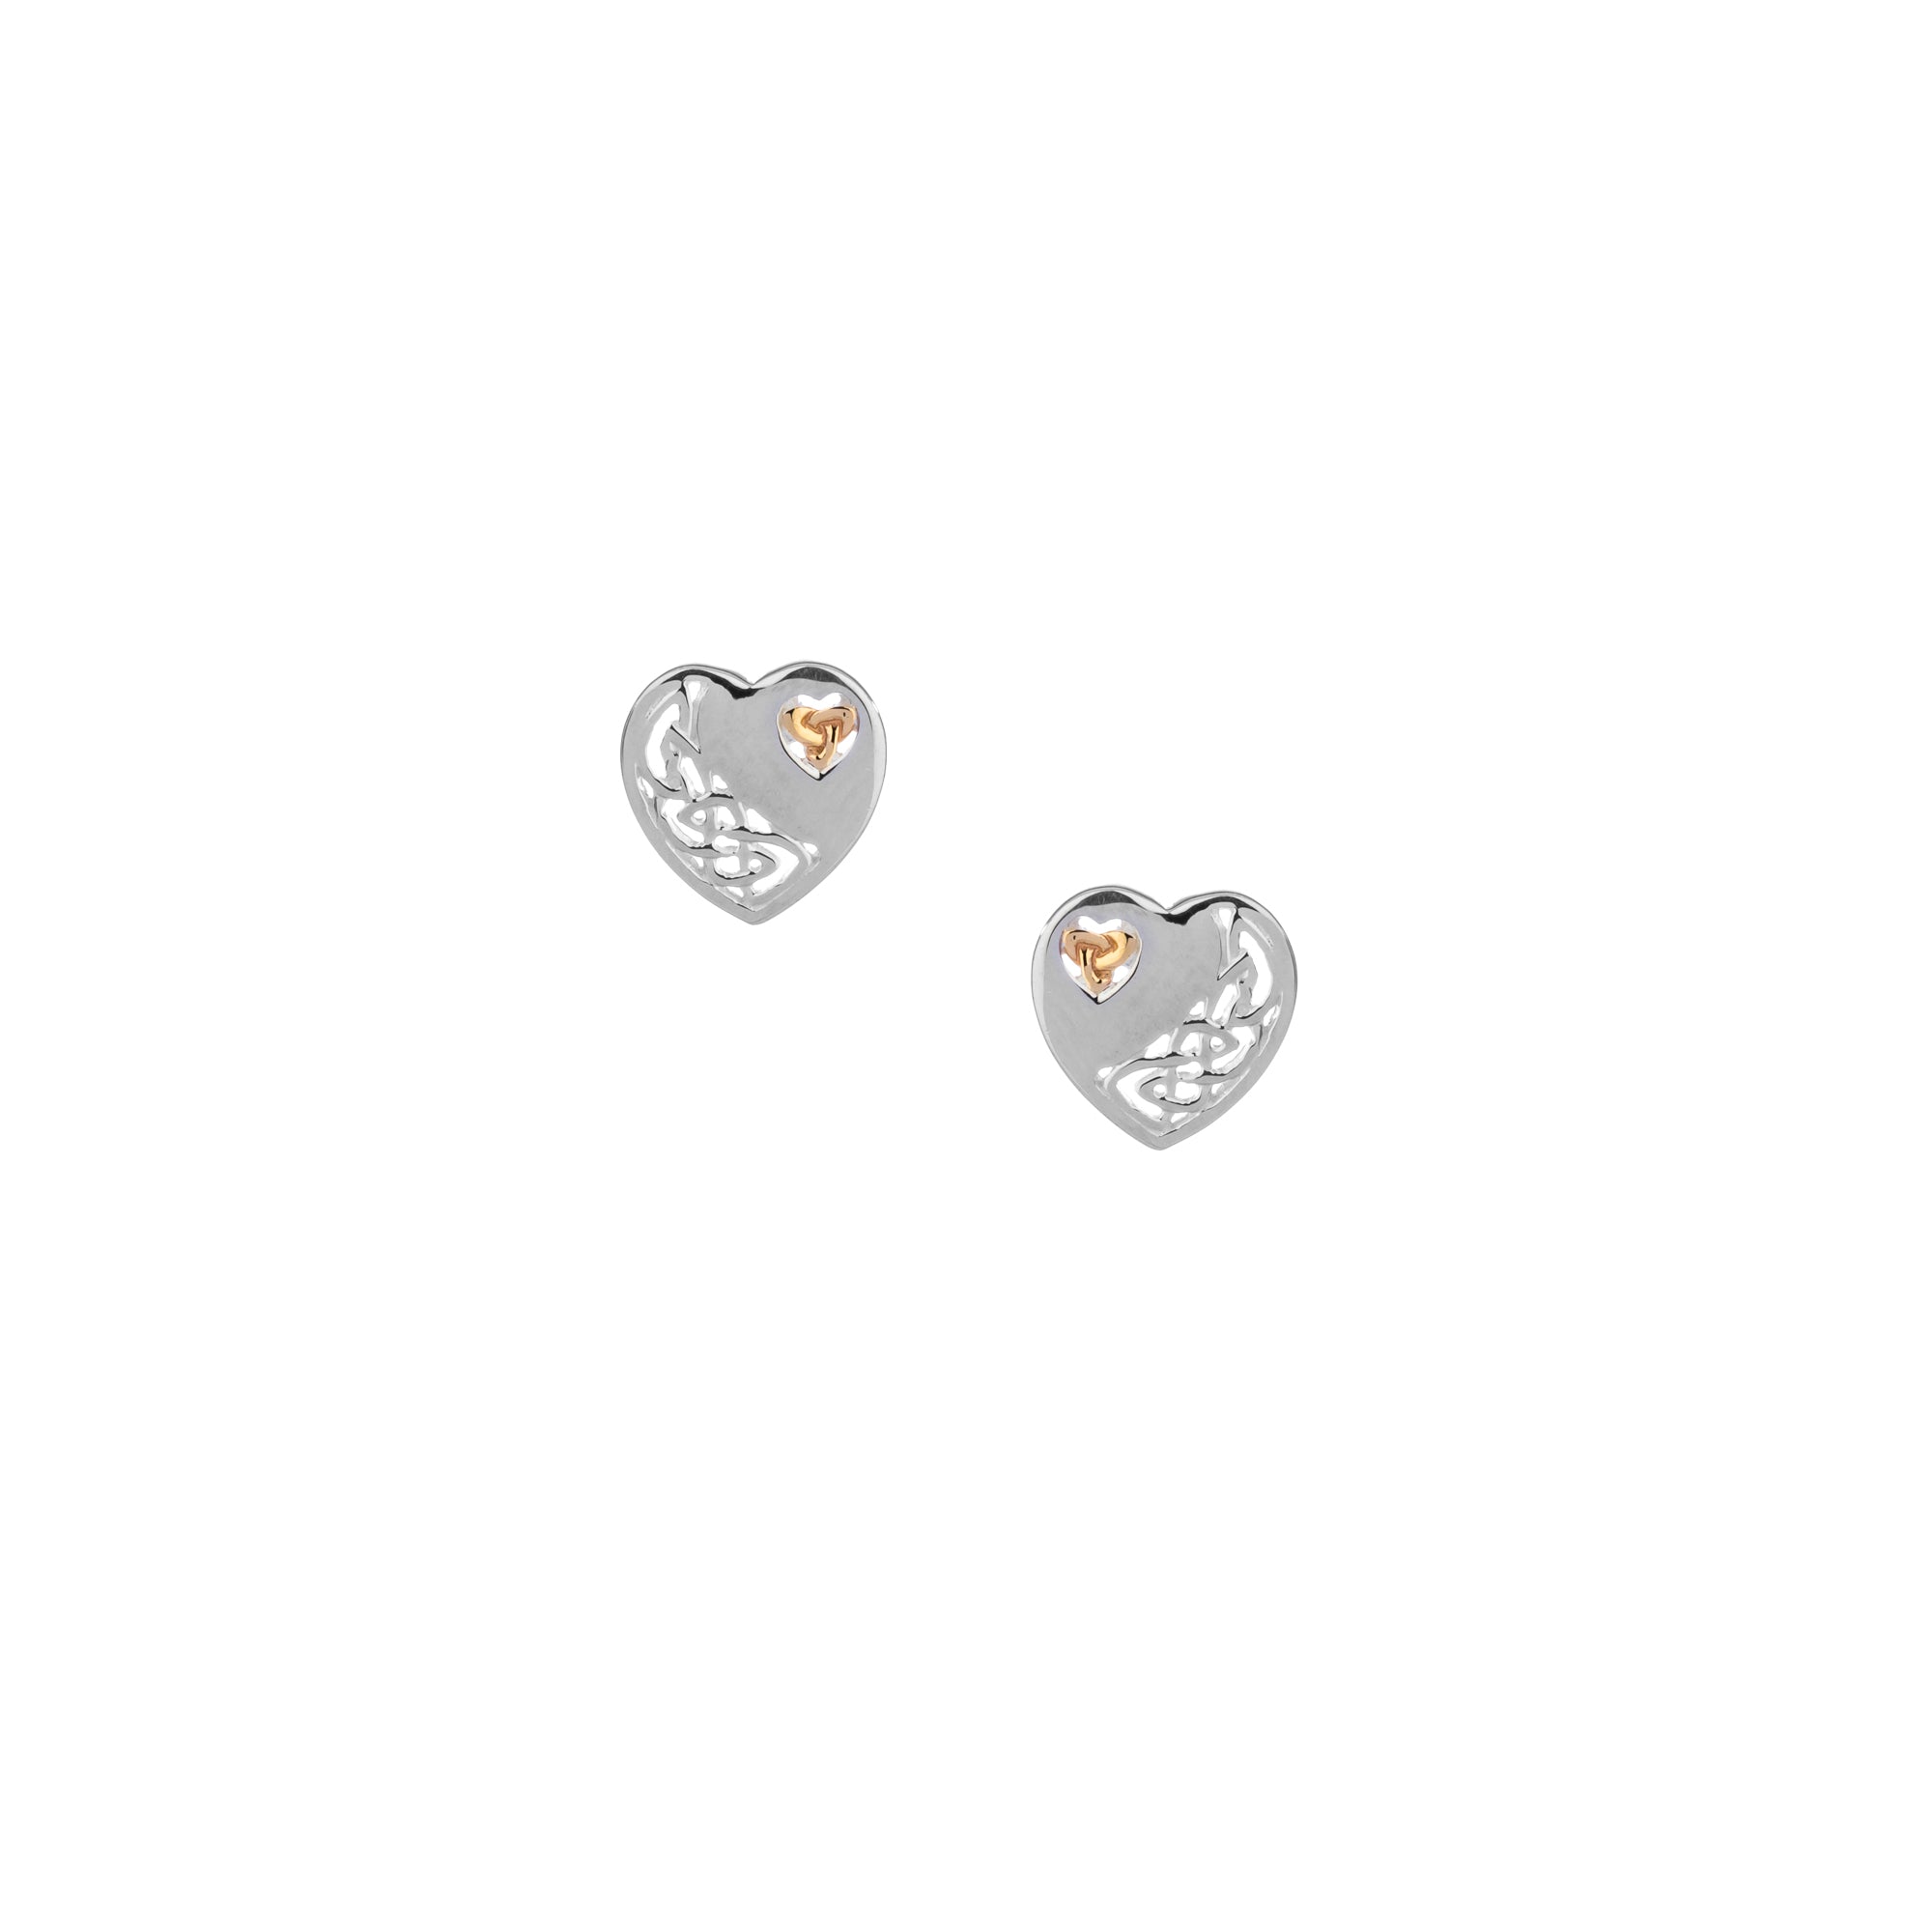 S/Silver and 10K Gold Celtic Heart Post Earrings